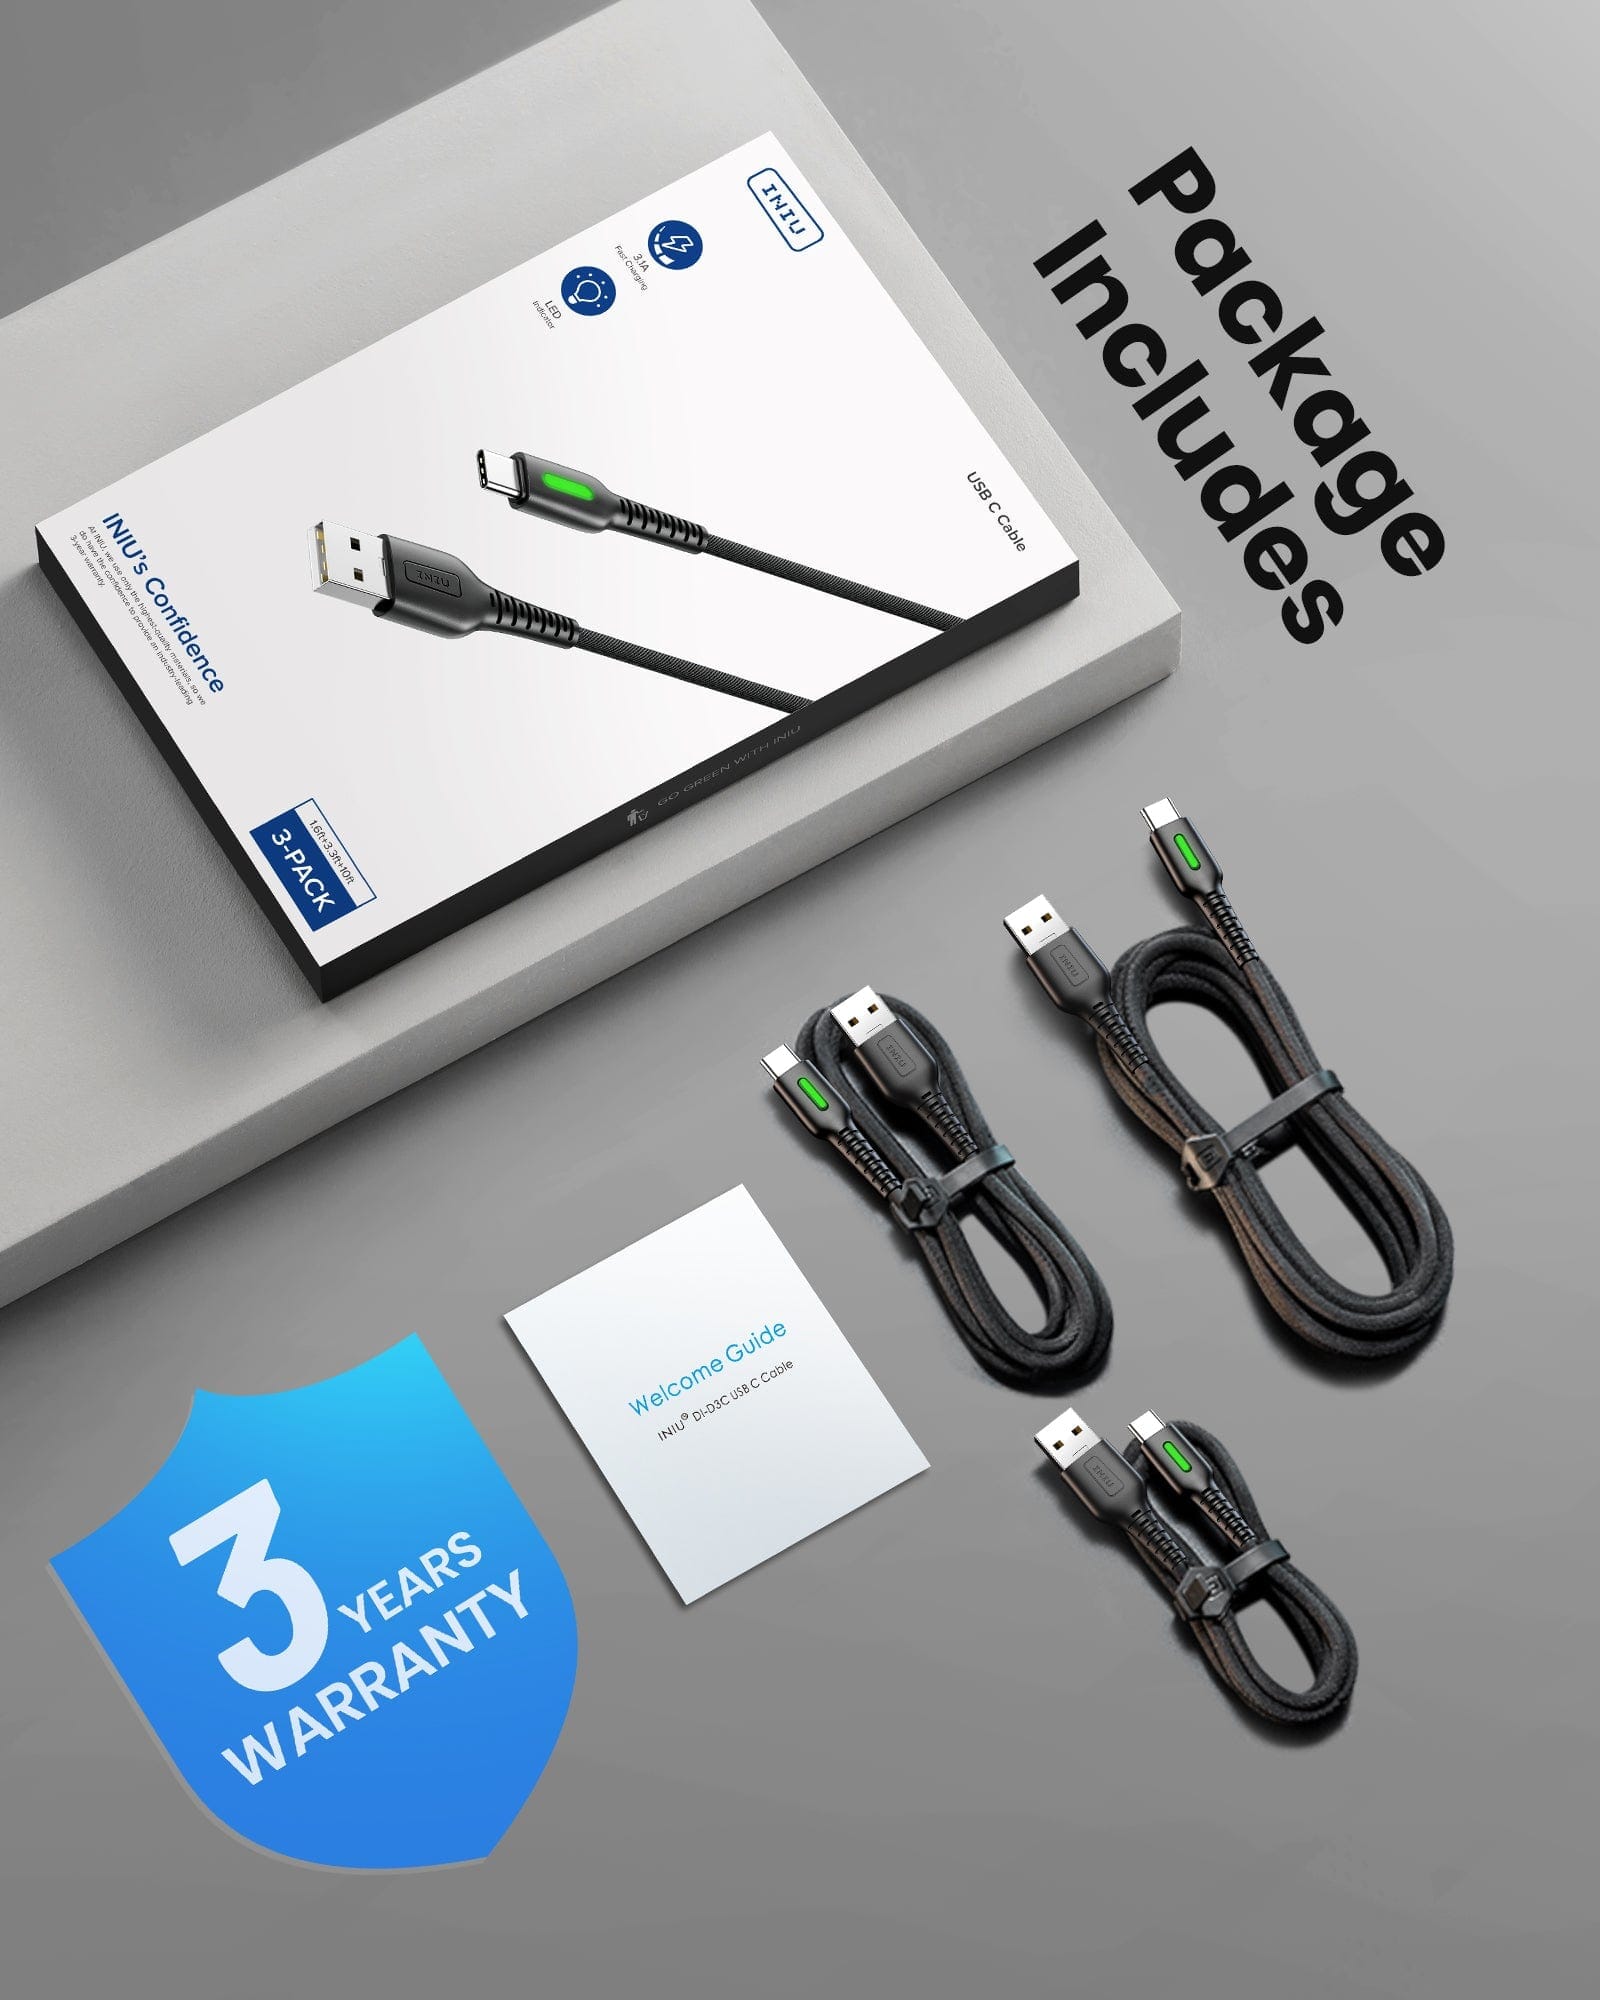 Package Includes: INIU Swoosh 3.1A QC USB C Braided Cables 3 Pack 【1.6ft+3.3ft+10ft, 3 years Warranty